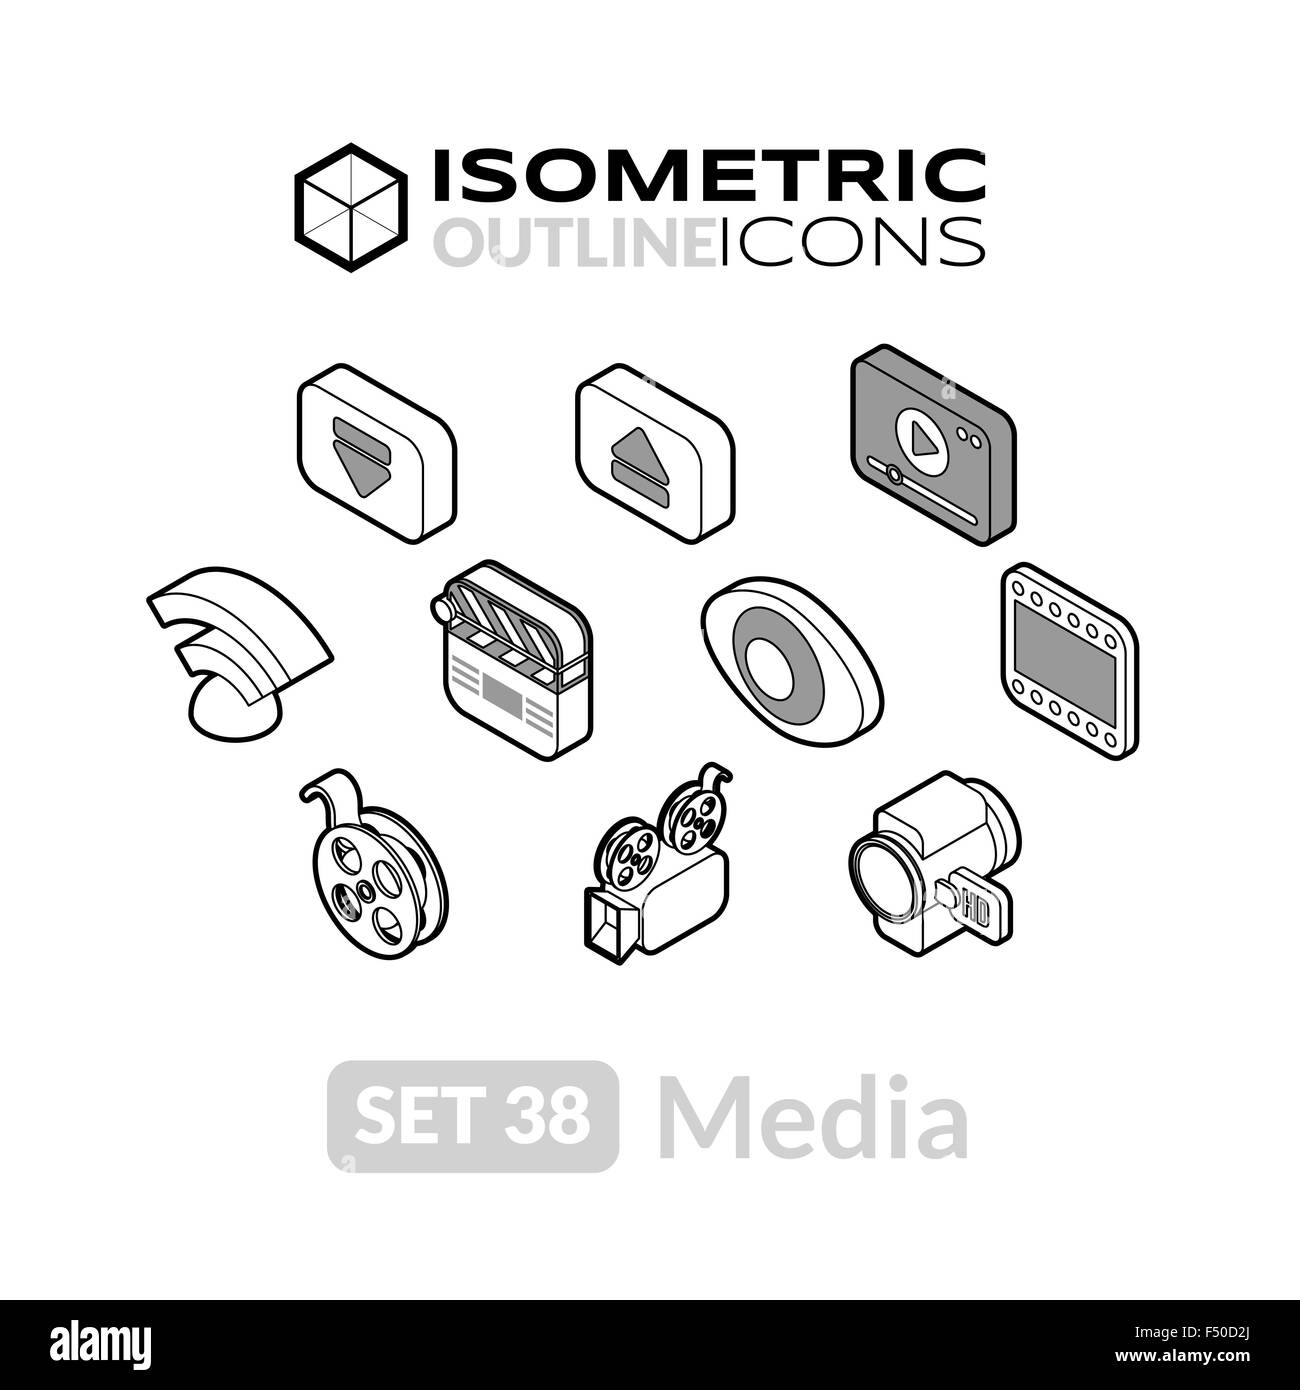 Isometric outline icons set 38 Stock Vector